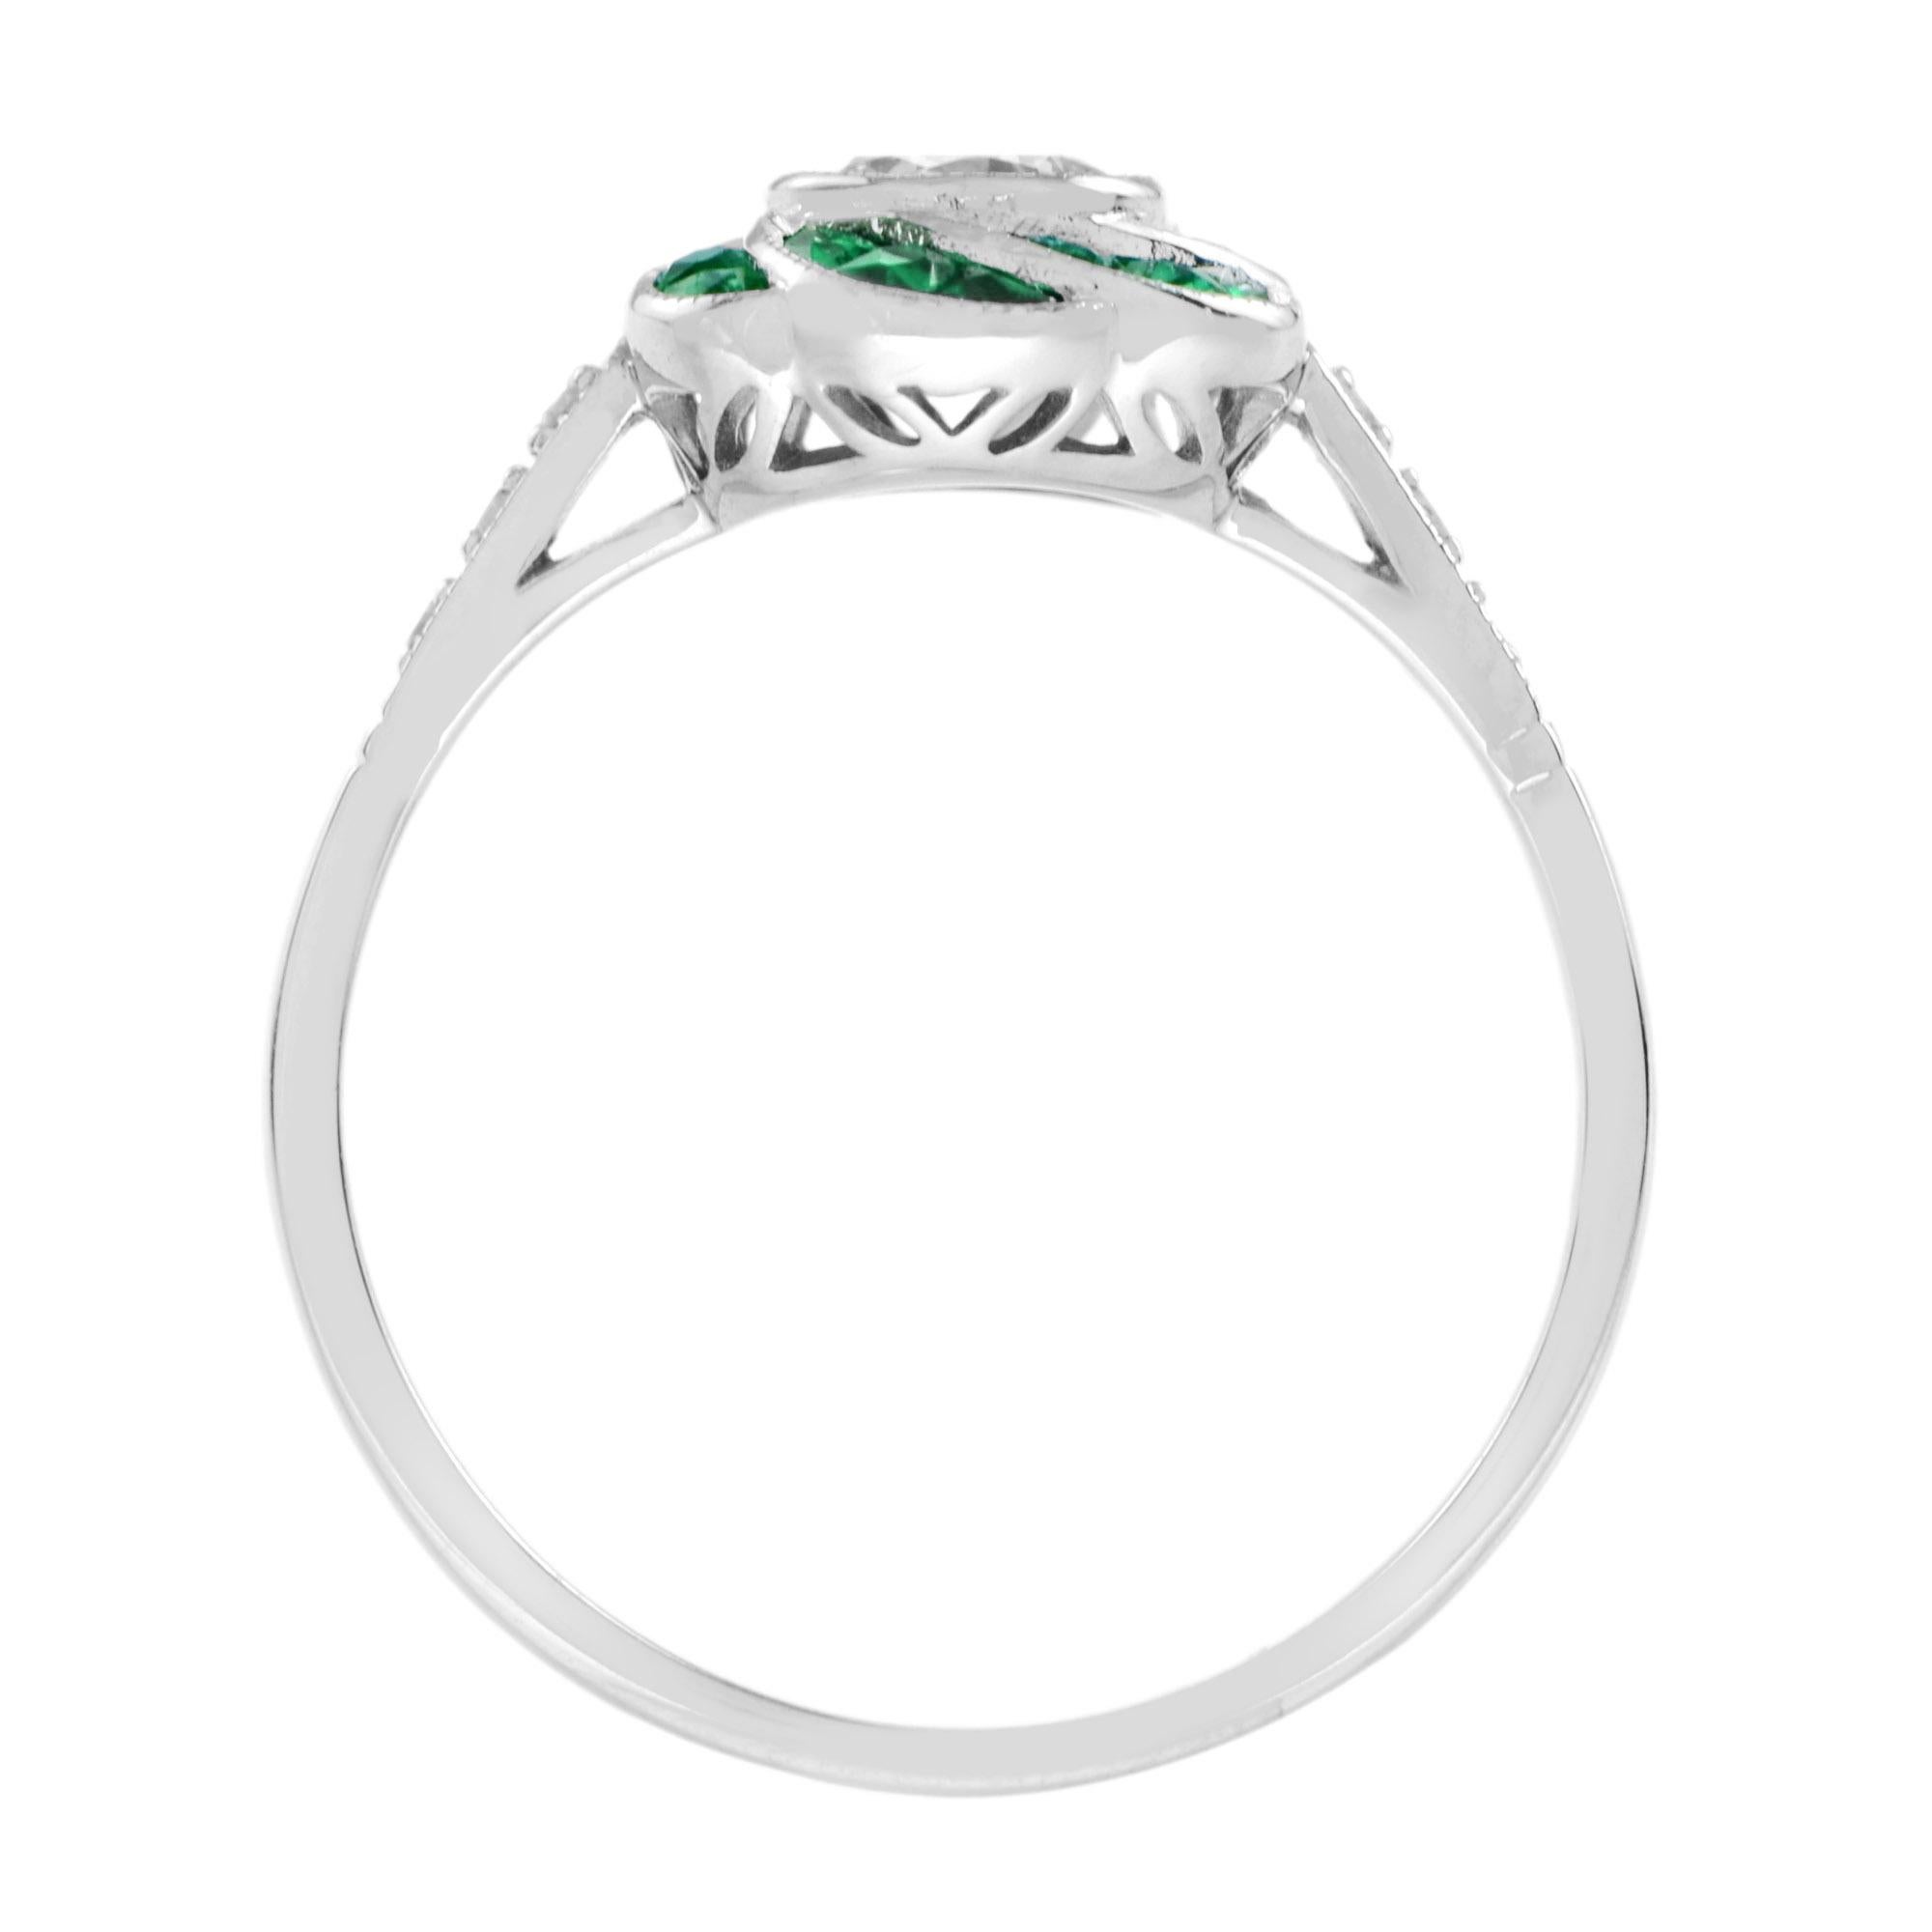 For Sale:  Diamond and Emerald Art Deco Style Rose Flower Ring in 18K White Gold 6